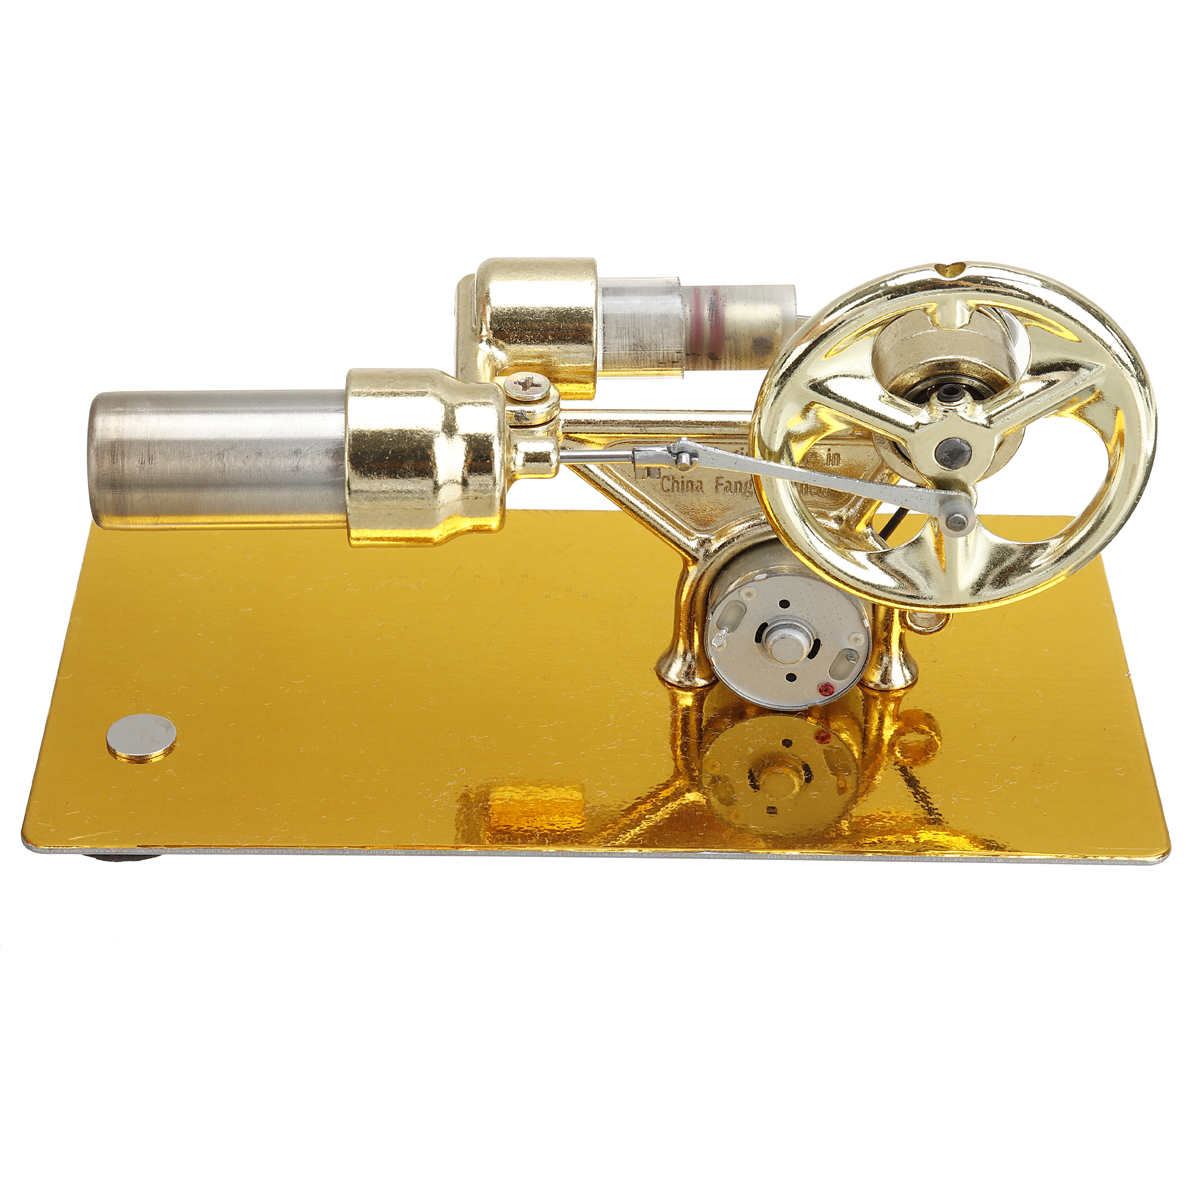 1PC-16-x-85-x-11-cm--Physical-Science-DIY-Kits-Stirling-Engine-Model-with-Parts-1939762-9